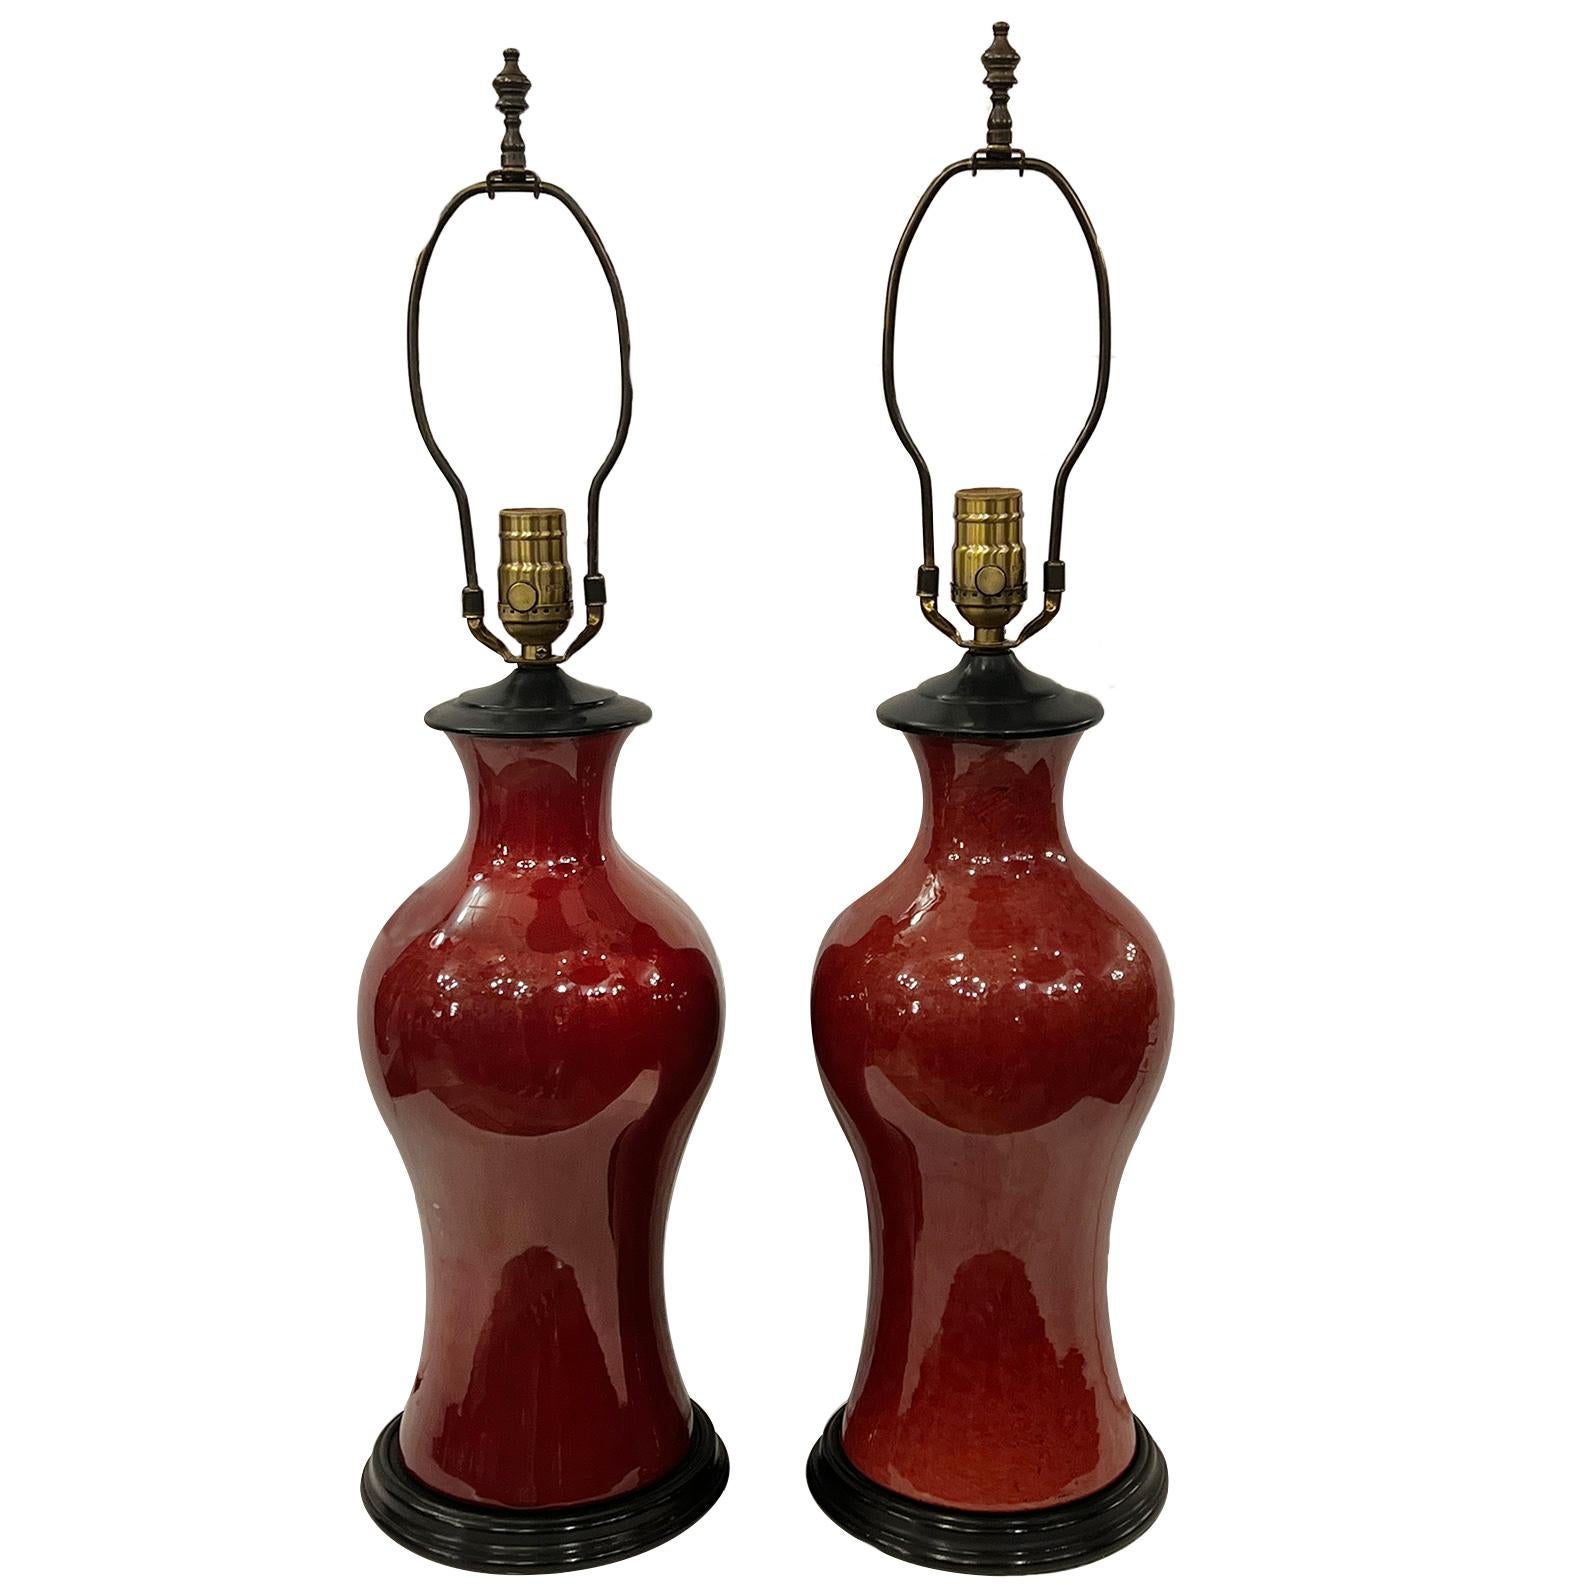 Pair of circa 1950's French sang de boeuf lamps with wood bases.

Measurements:
Height of body: 16.5